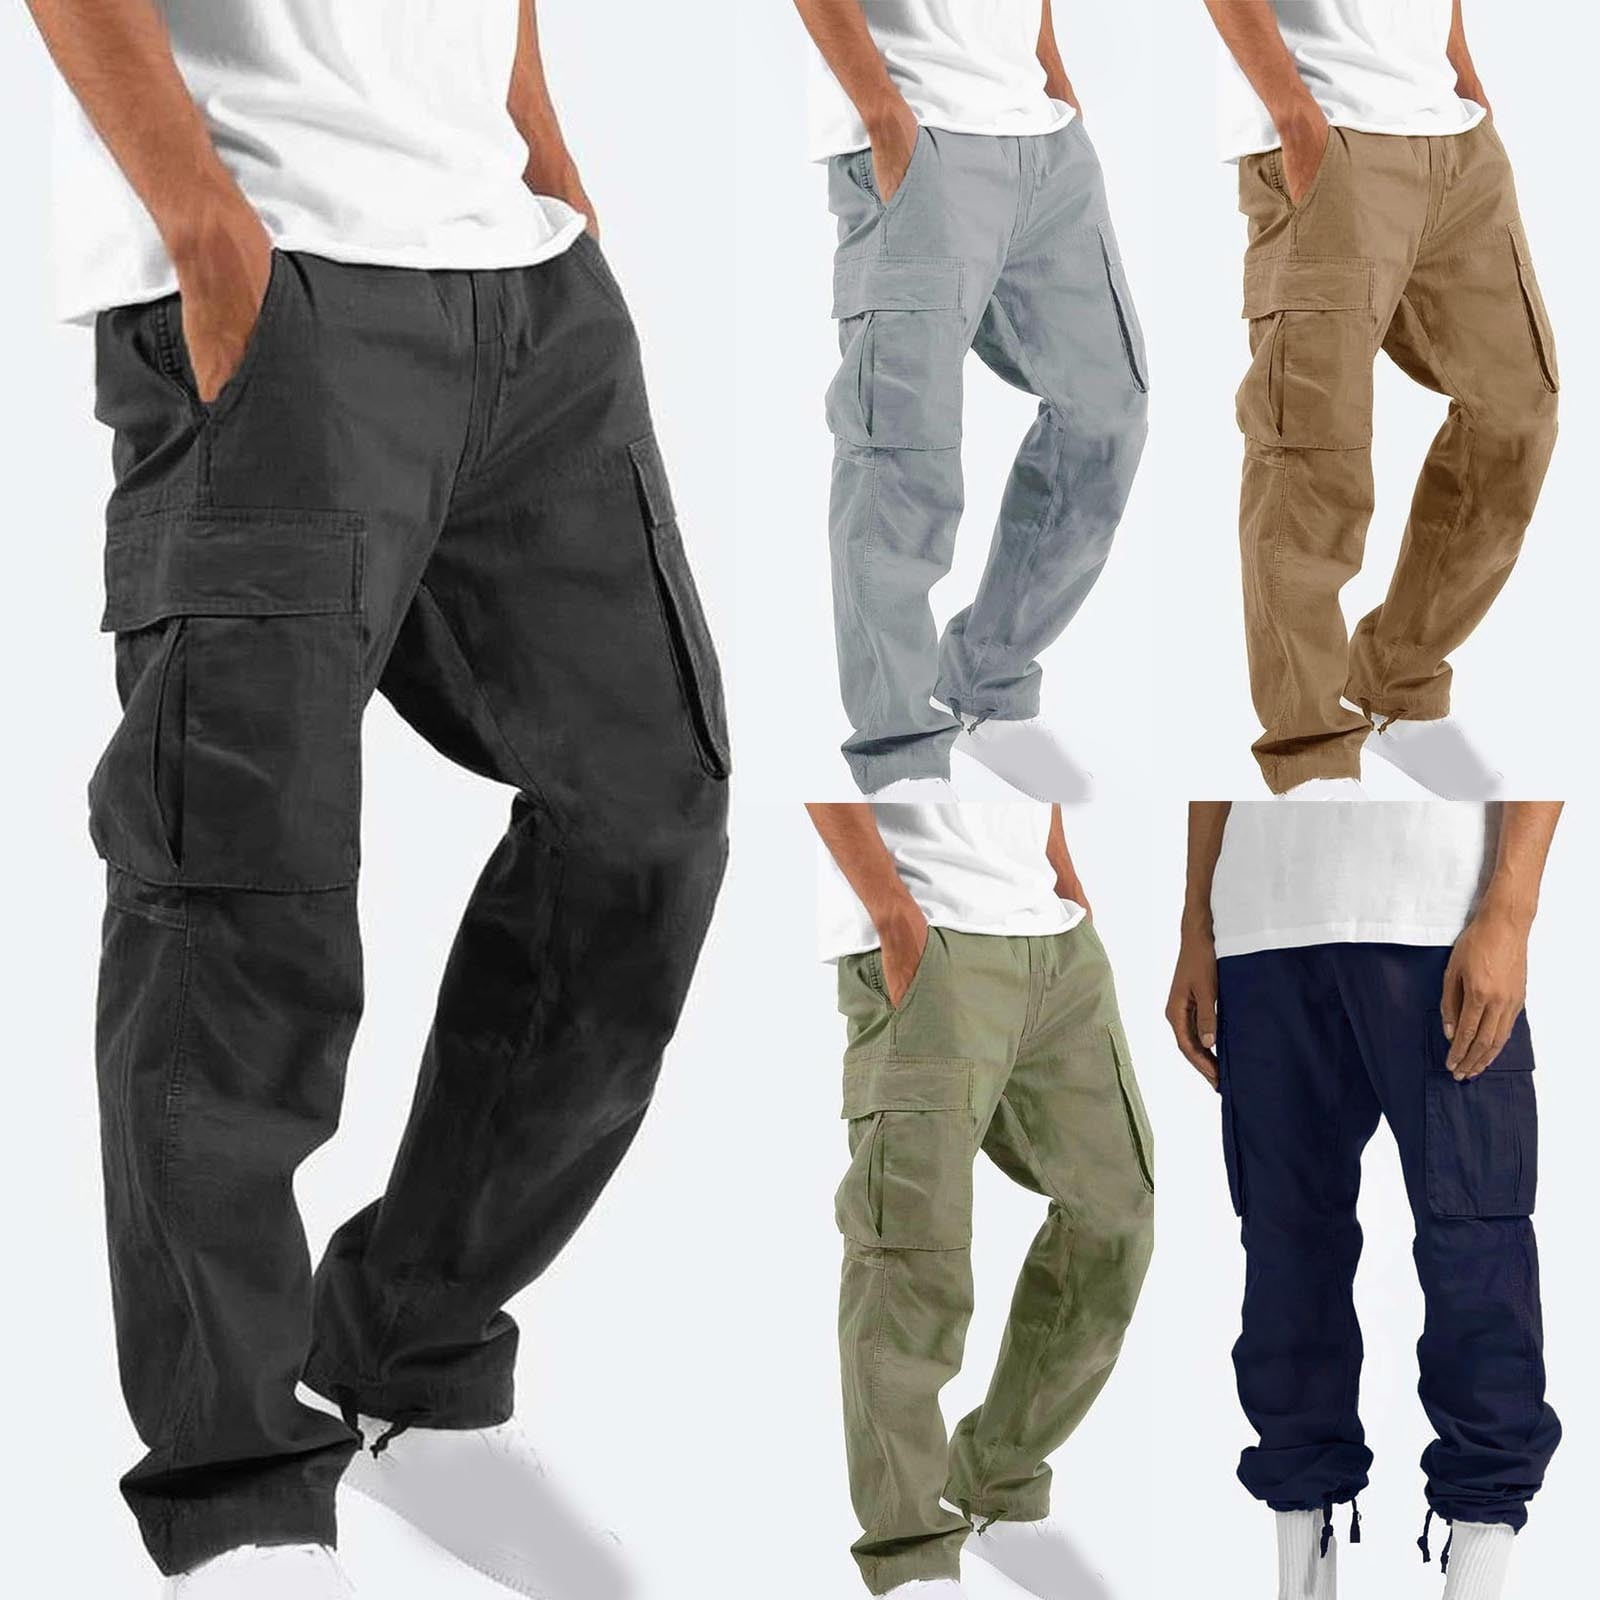 Fall Clearance Sale! RQYYD Men's Cargo Pants with Multi-Pockets Cotton  Sweatpants Casual Athletic Jogger Work Sports Outdoor Trousers(Khaki,XL) -  Walmart.com